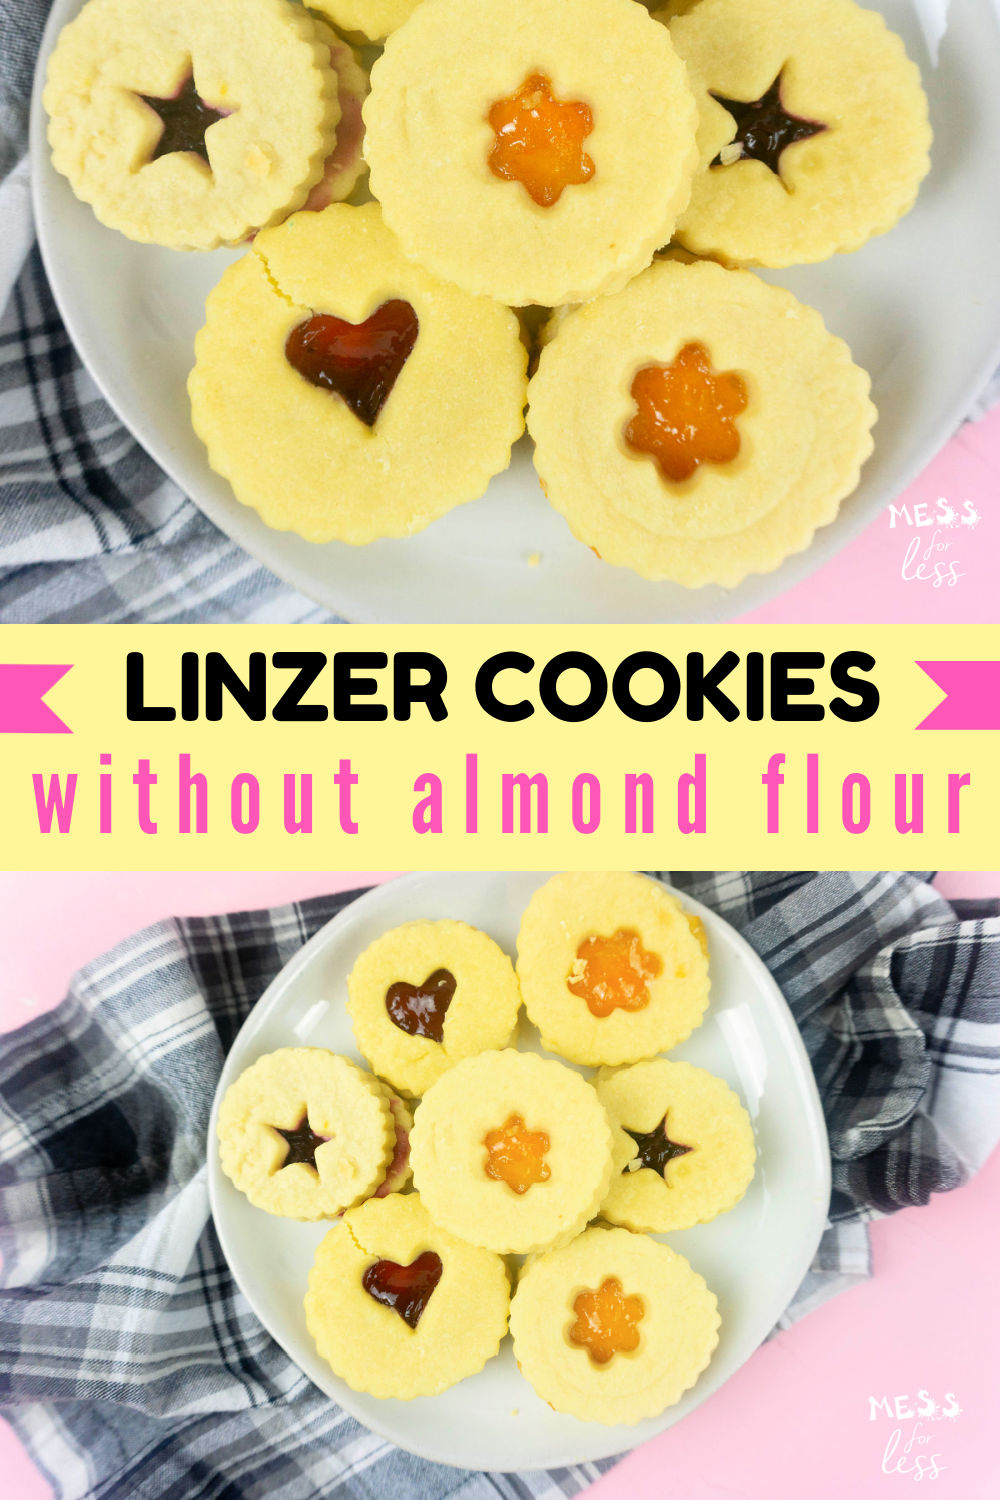 Traditionally, linzer cookies use ground almonds. But if you don’t want almonds in your diet, here’s how to make the best homemade linzer cookies without almond flour.